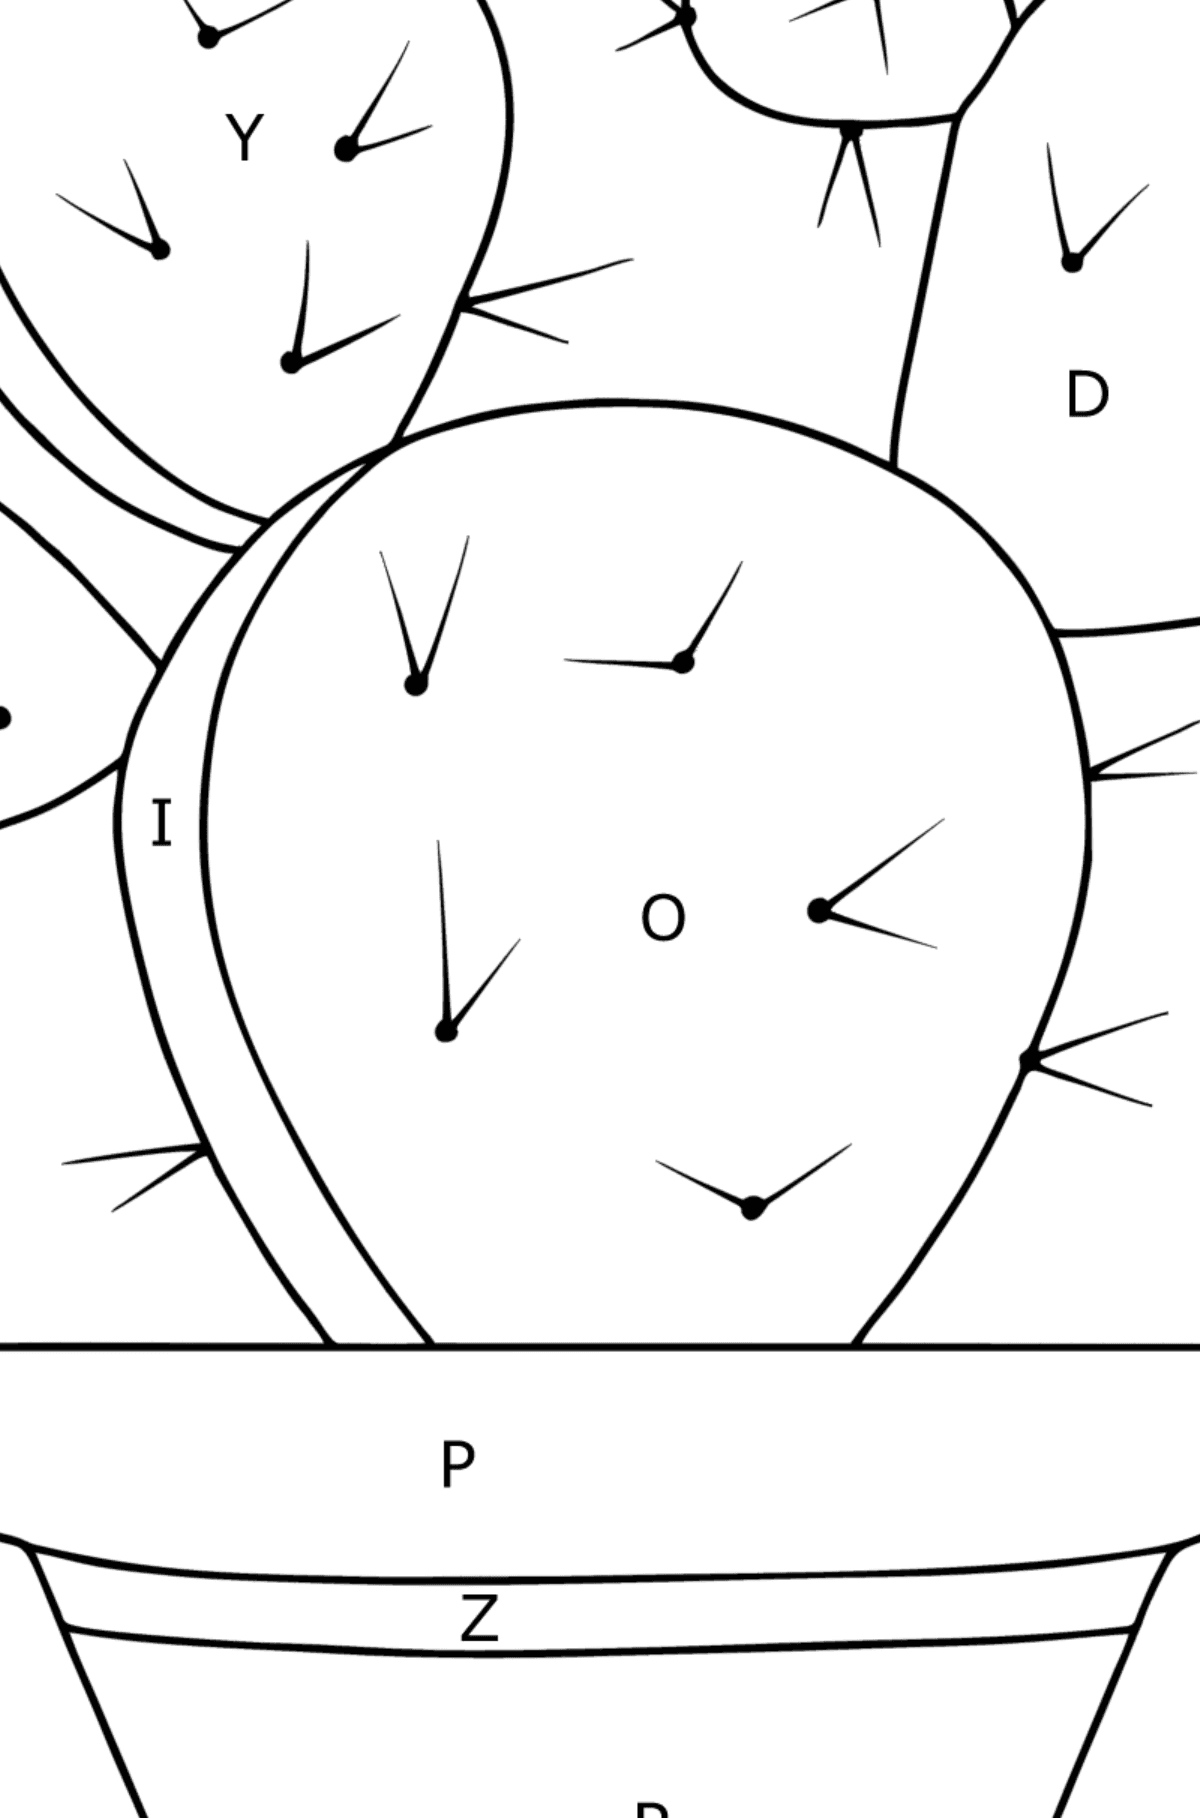 Prickly pear Cactus coloring page - Coloring by Letters for Kids